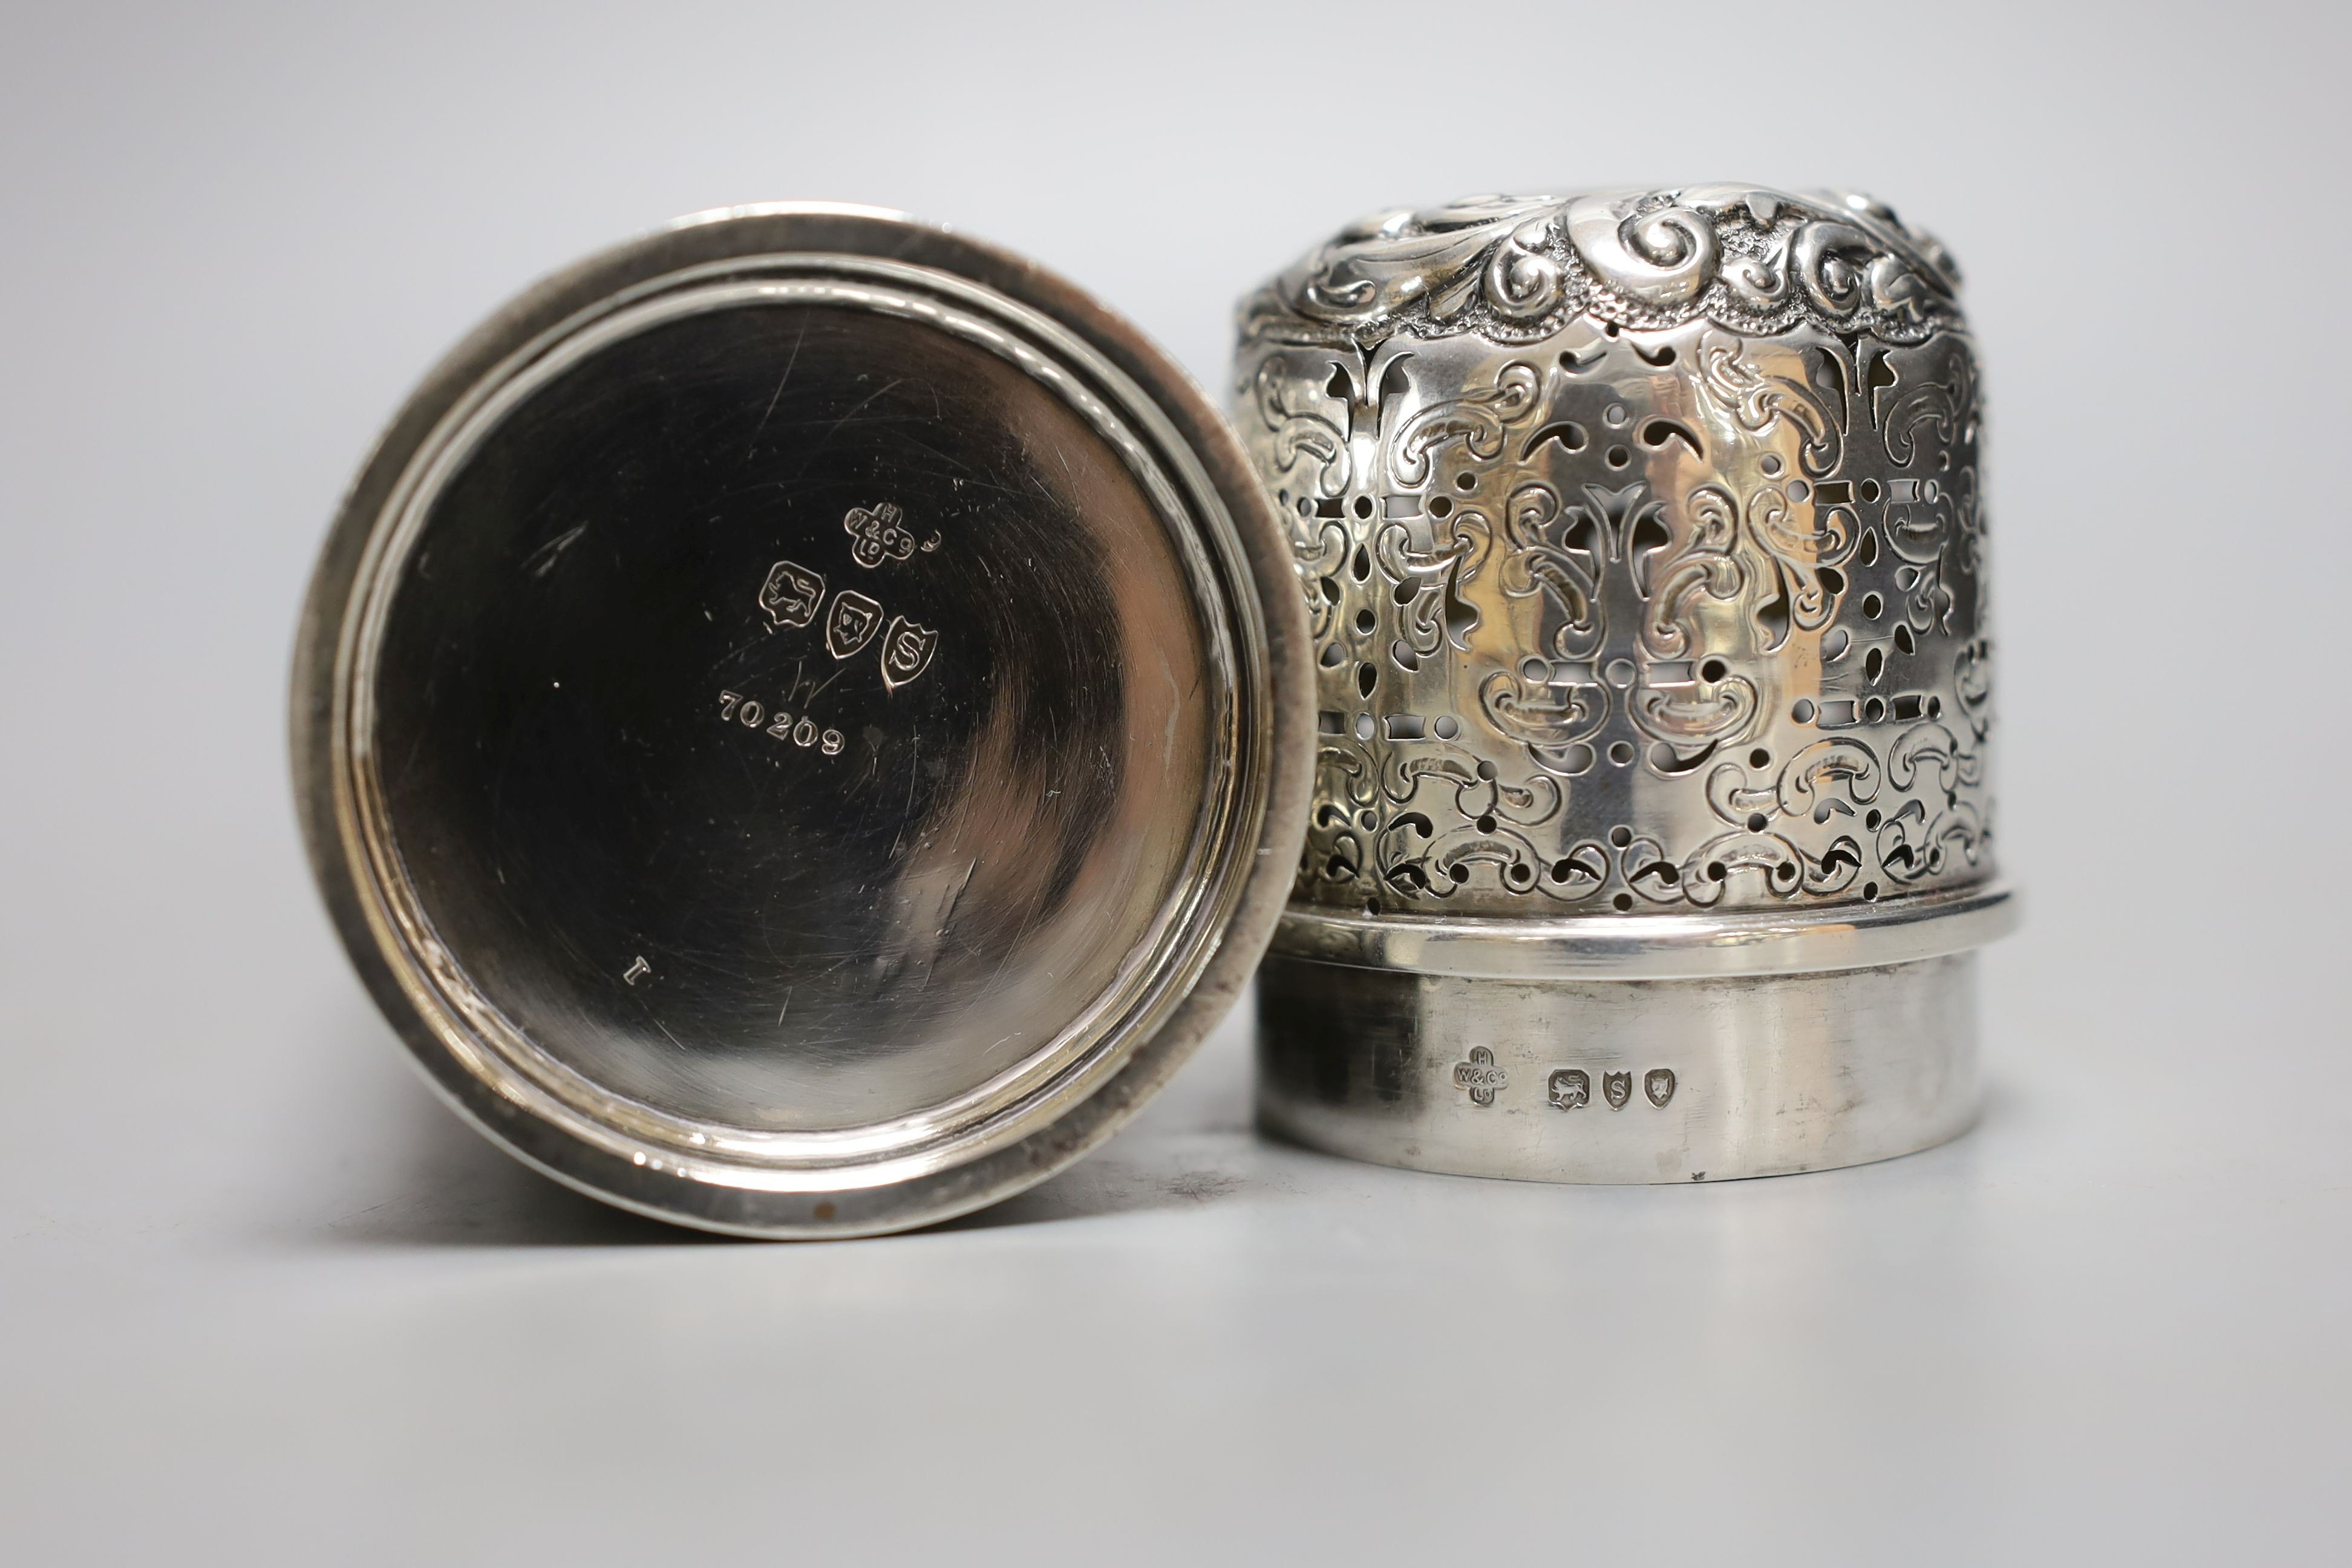 A late Victorian embossed silver lighthouse sugar caster, Horace Woodward & Co, London, 1893, 15.4cm, 5.5oz.